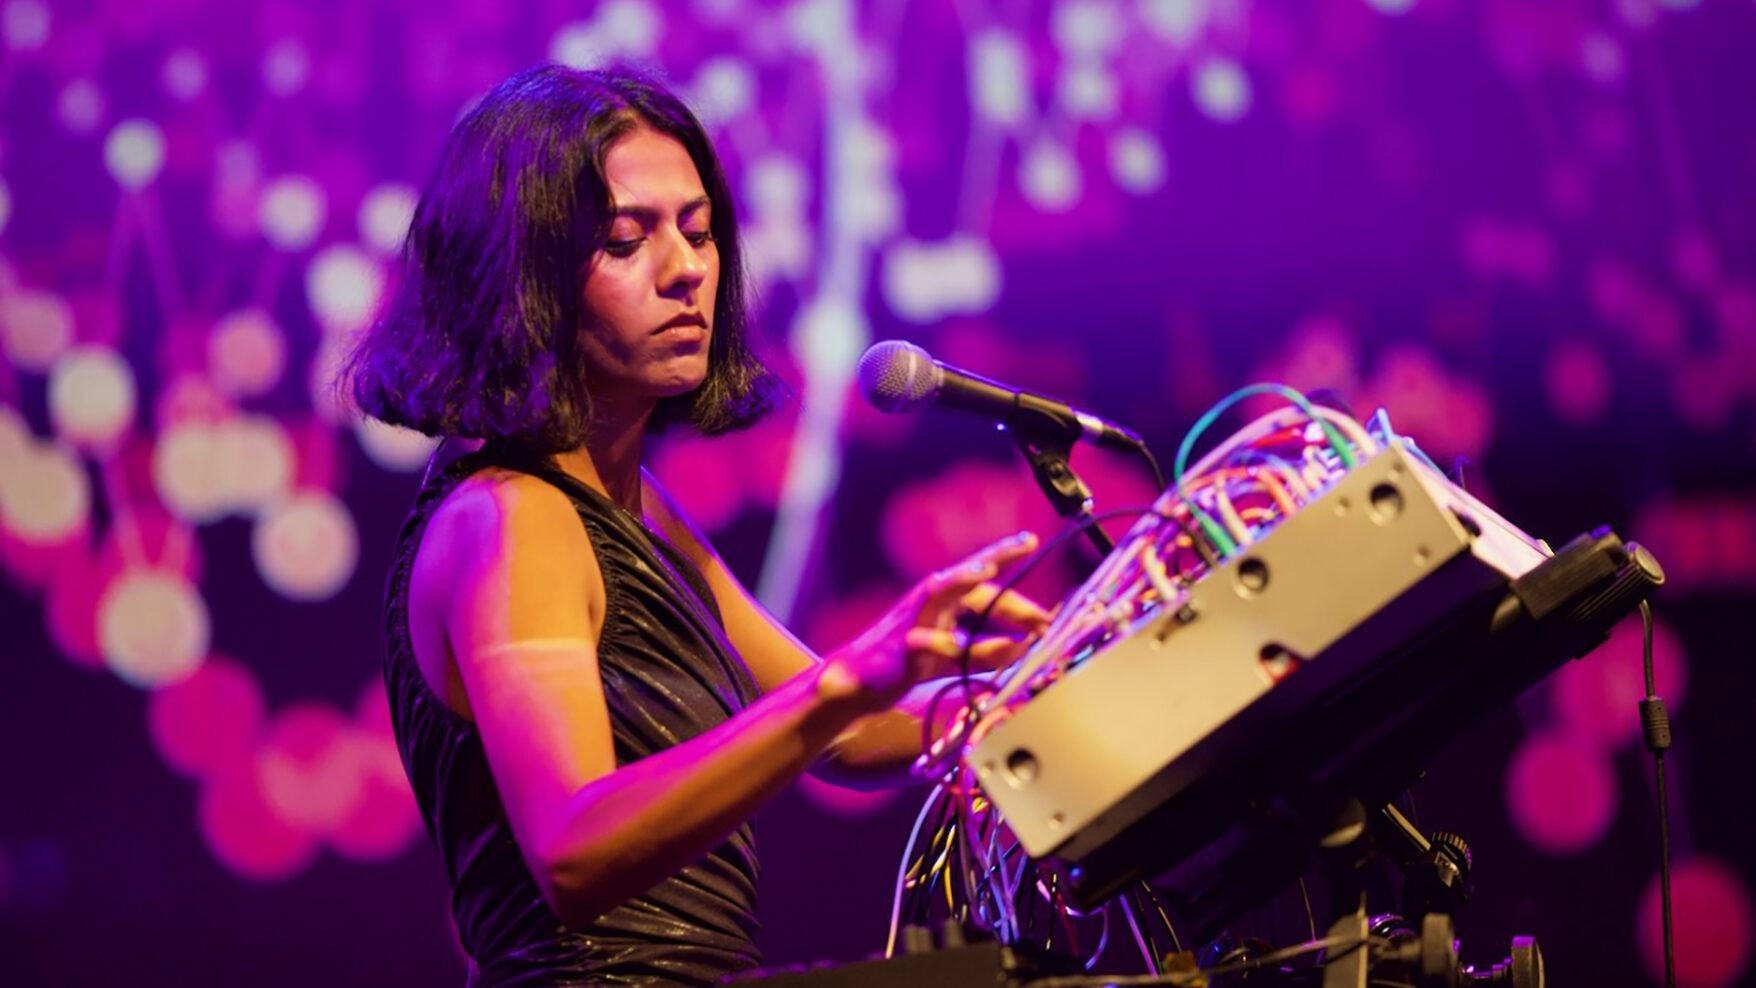 Arushi Jain performs at Krannert during Pygmalion 2023. She's standing in front of a large technical device with a lot of wires called a modular synthesizer. The screen behind her is full of purple tinted stars.